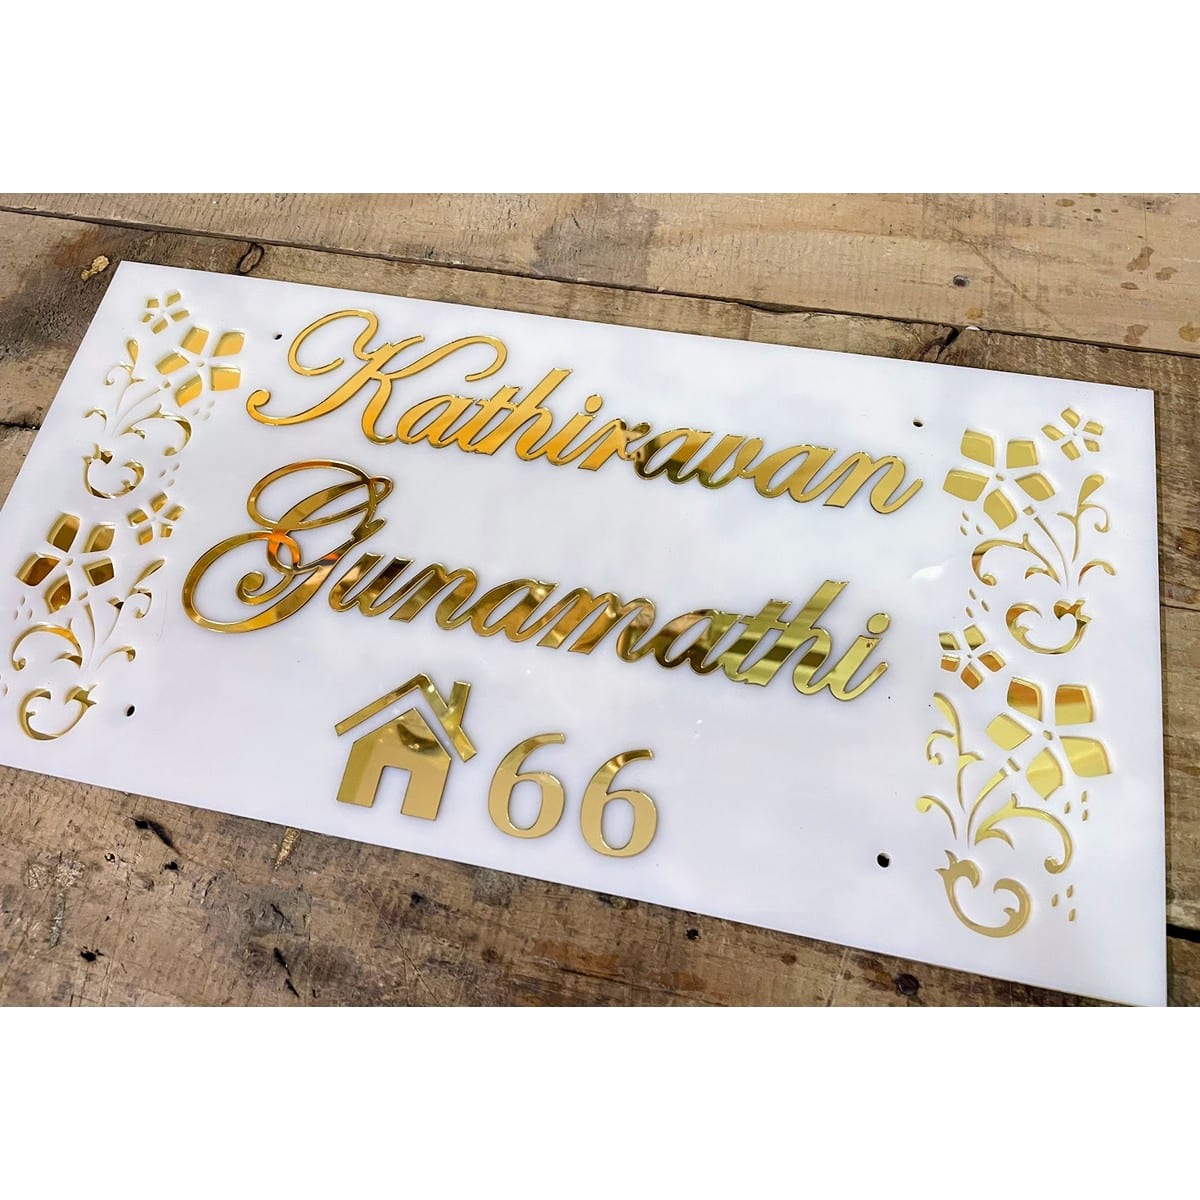 Golden Acrylic Embossed Letters Customized House Name Plate 3